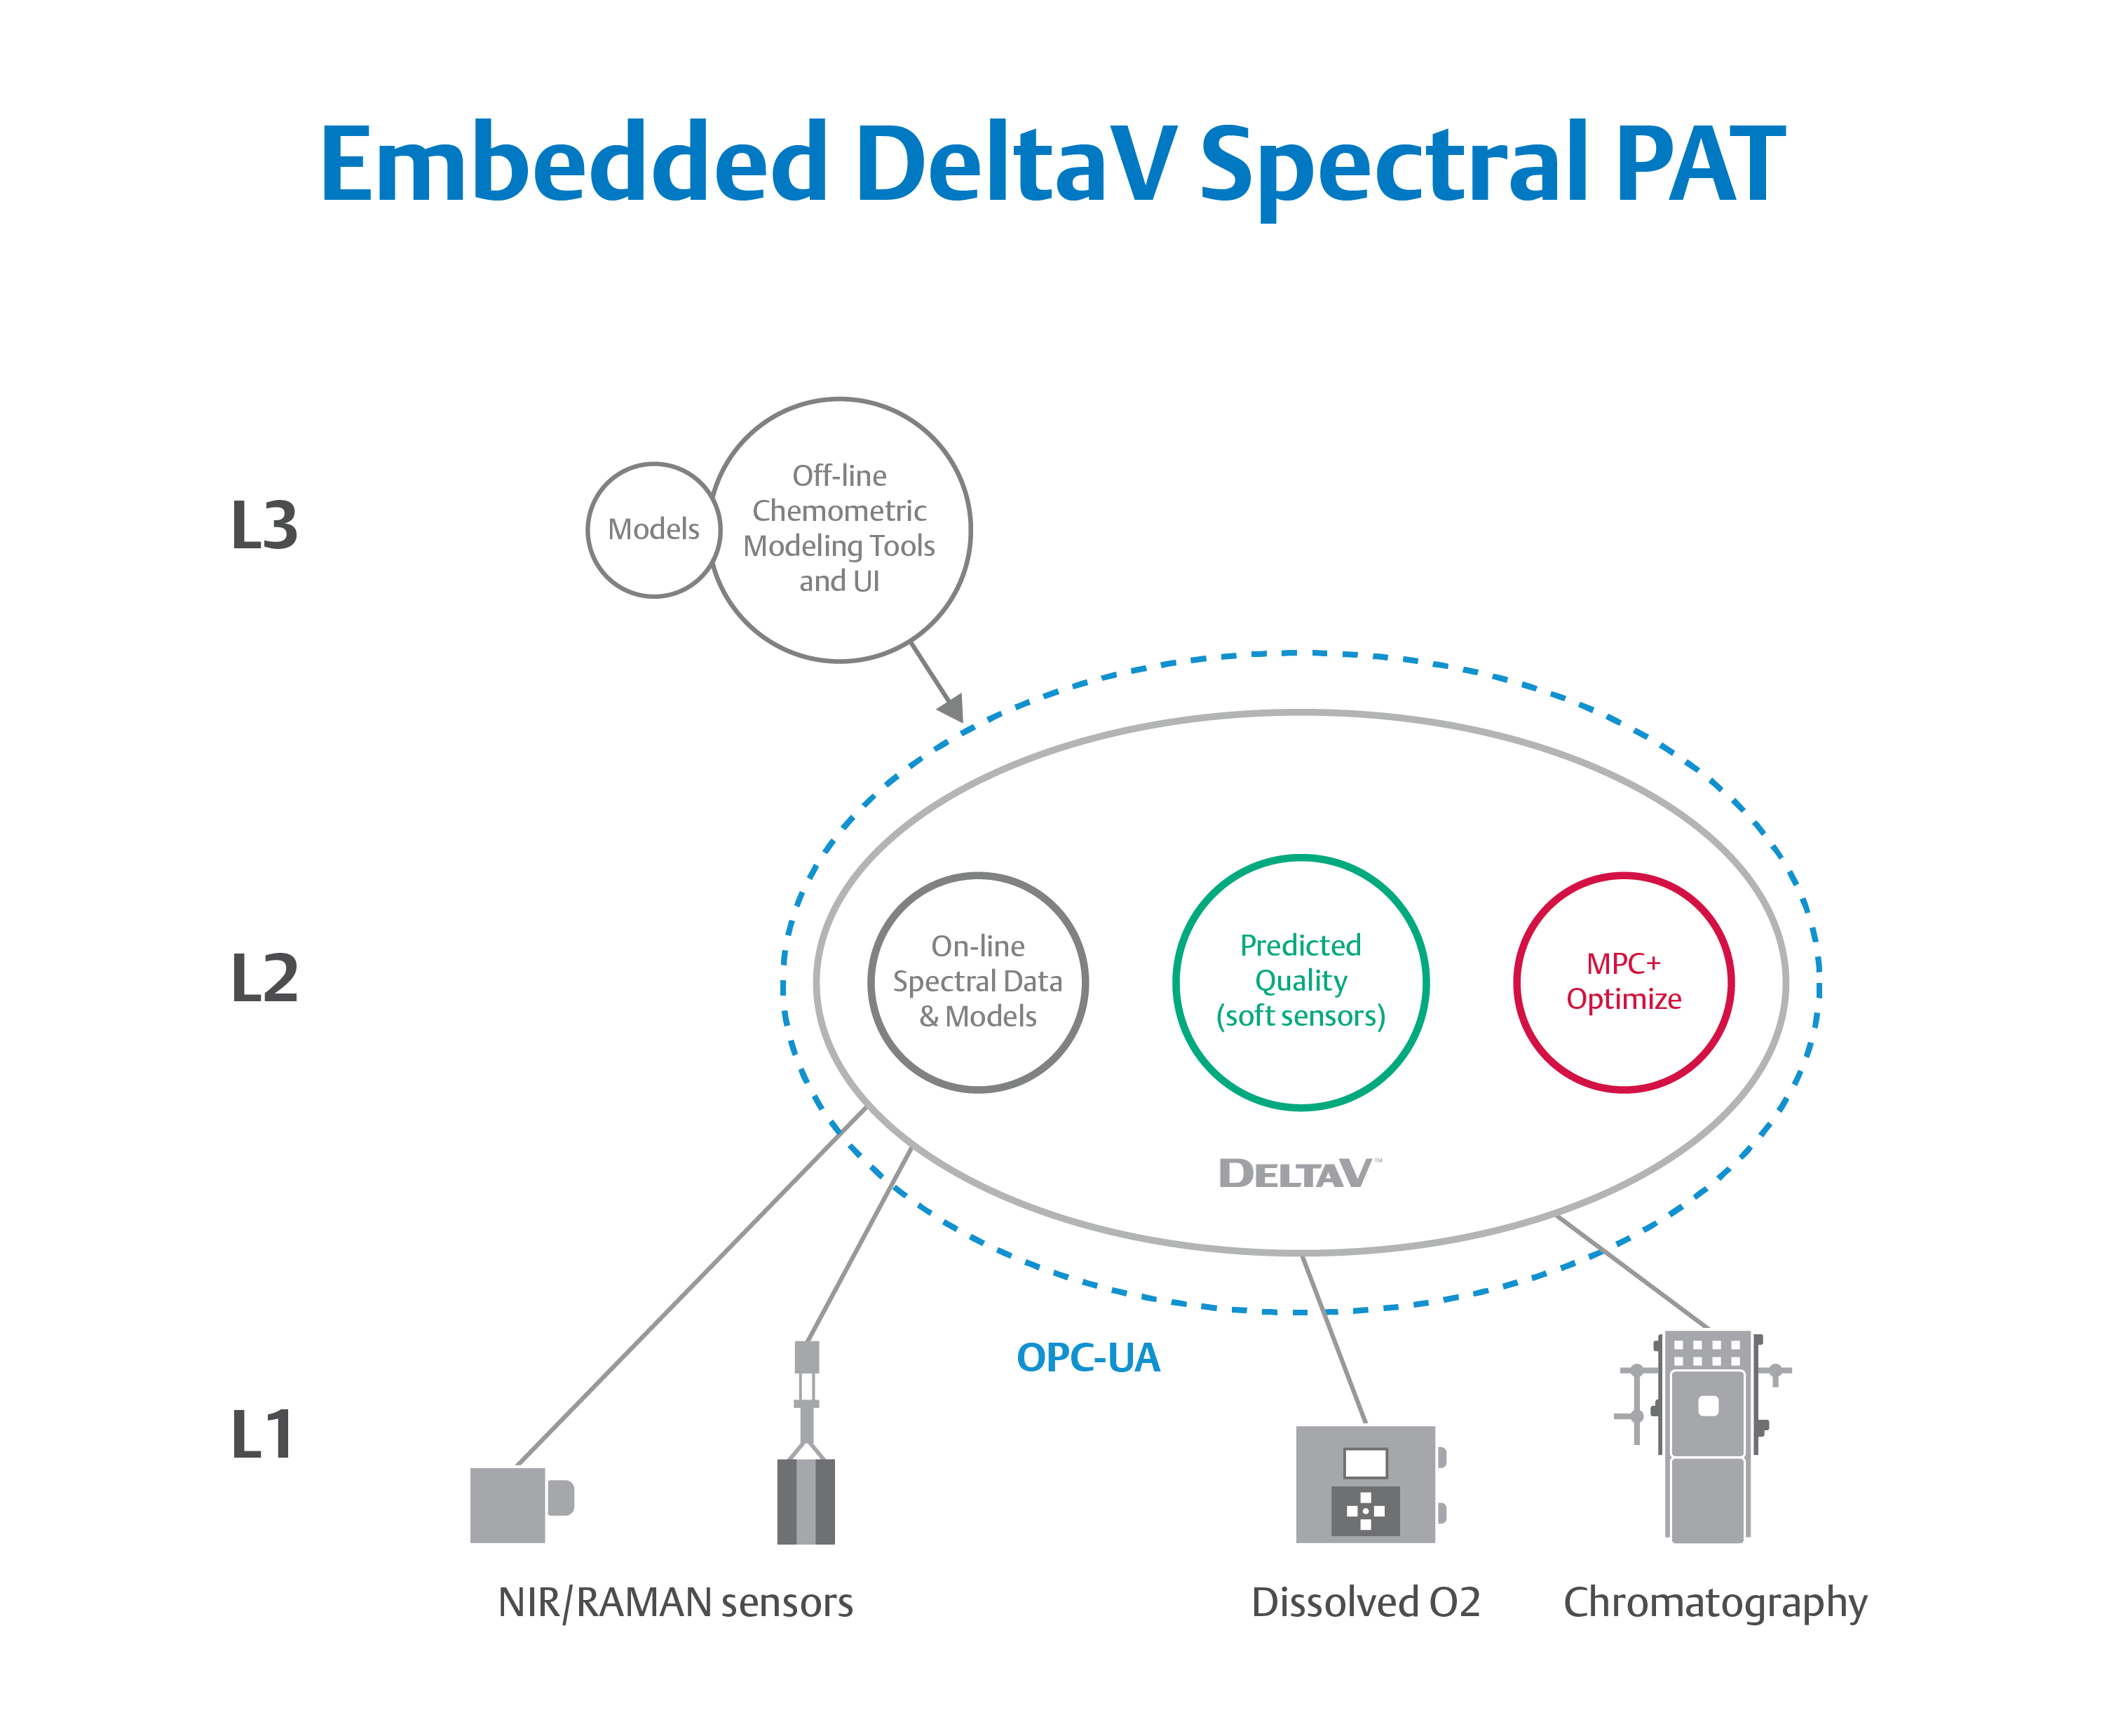 Real-World Implications of Spectral PAT for Life Sciences